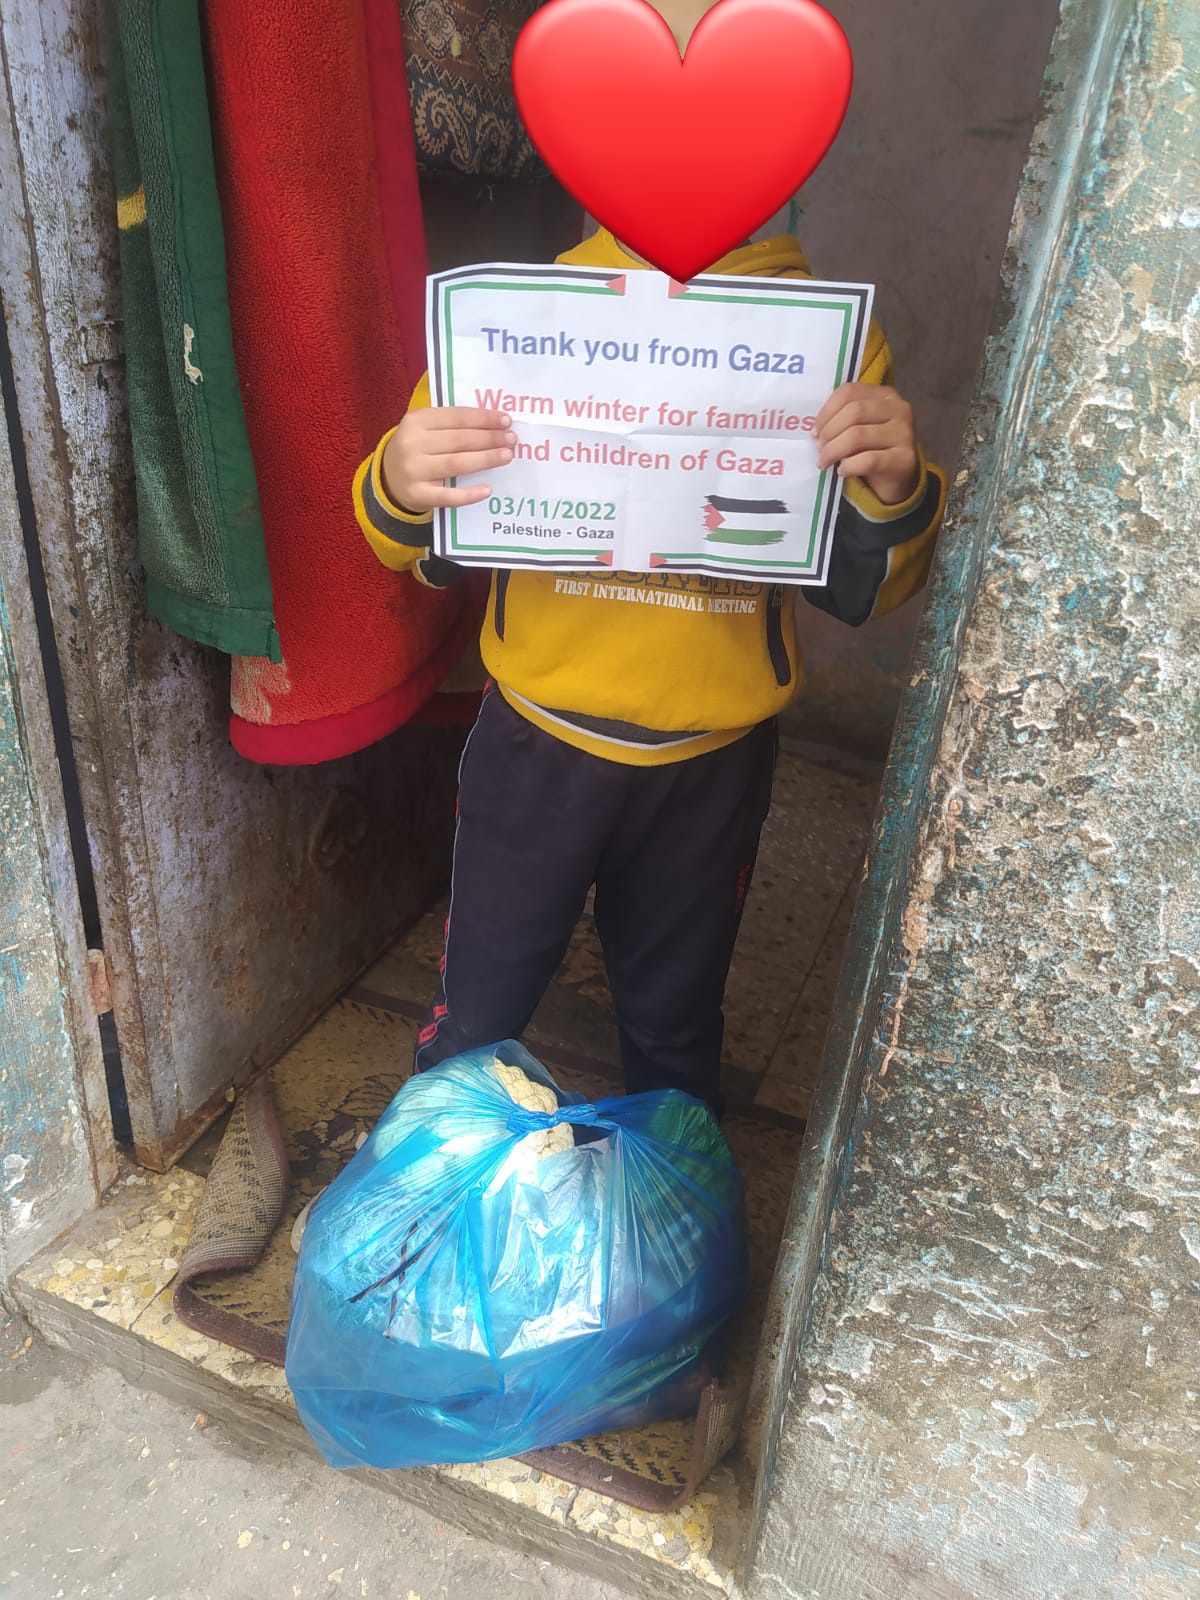 Warm winter for families and children in need of Gaza